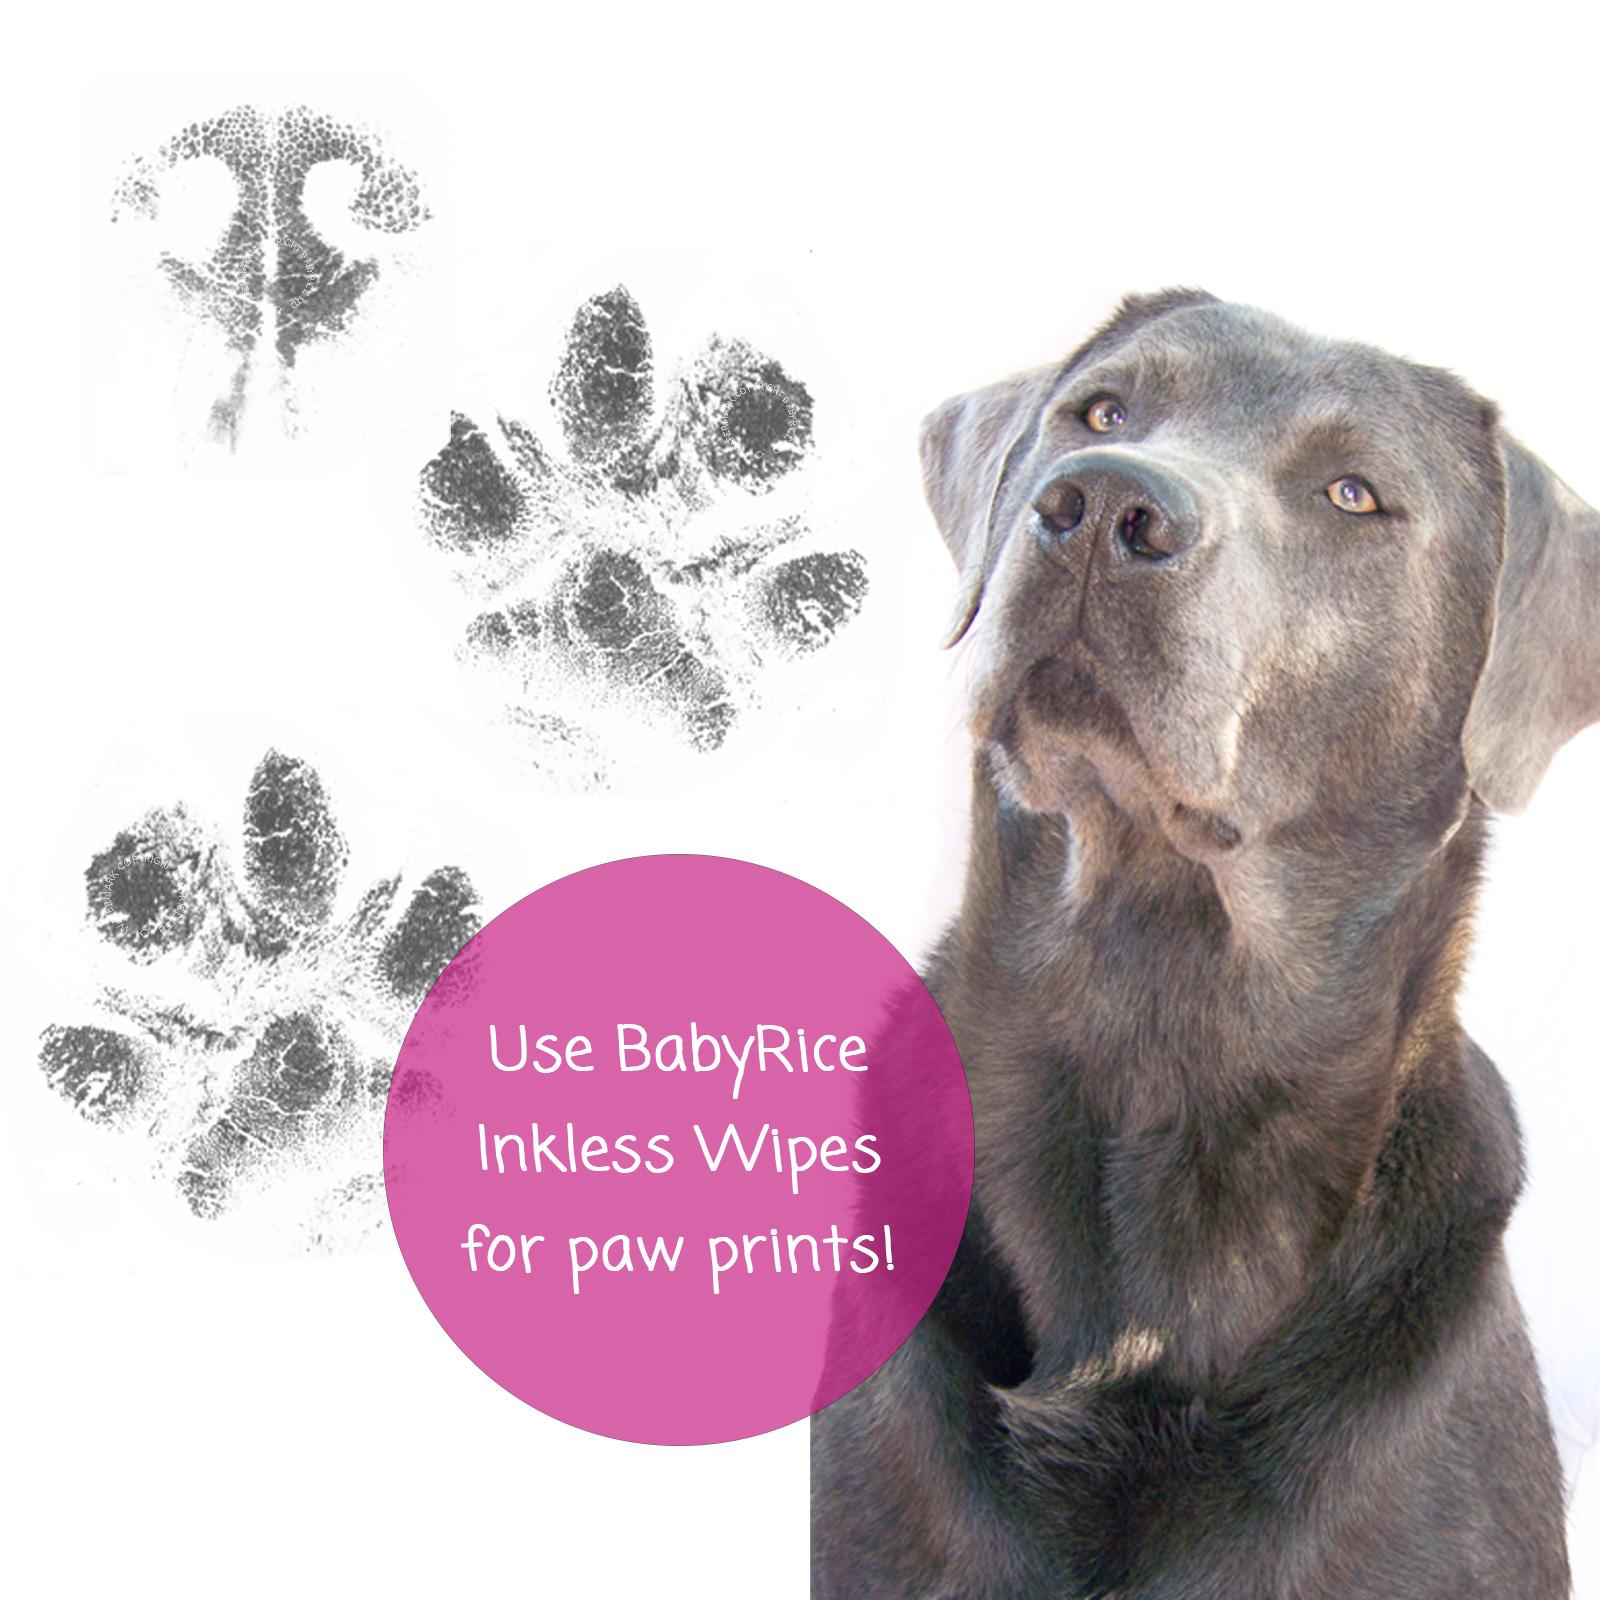 BabyRice inkless printing wipes are safe to use on pet paws too